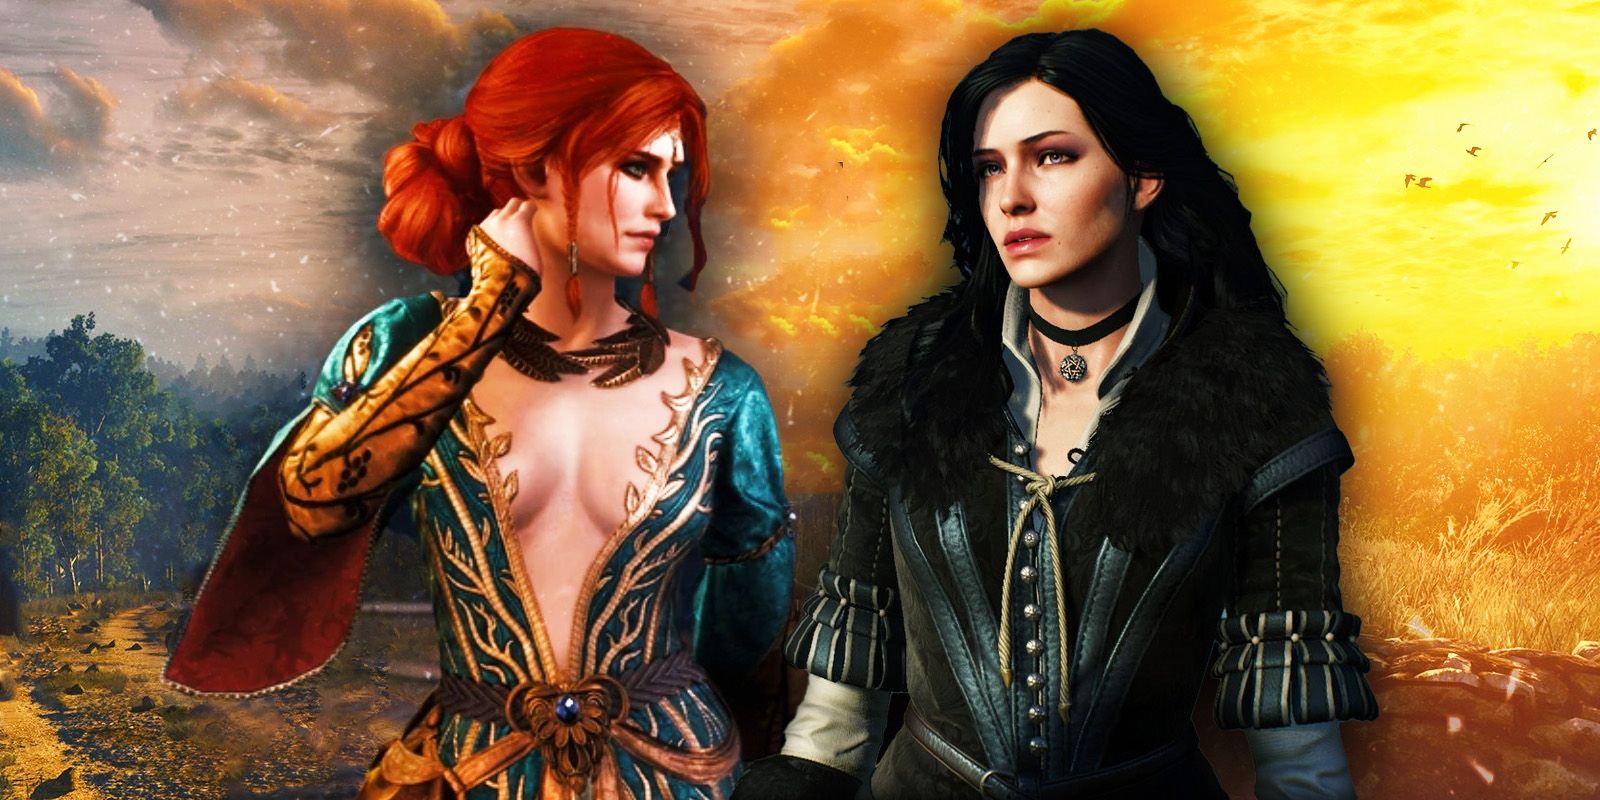 Images of Triss in her alternative gown and Yennefer in her default outfit against a shot of a sunset in Witcher 3.